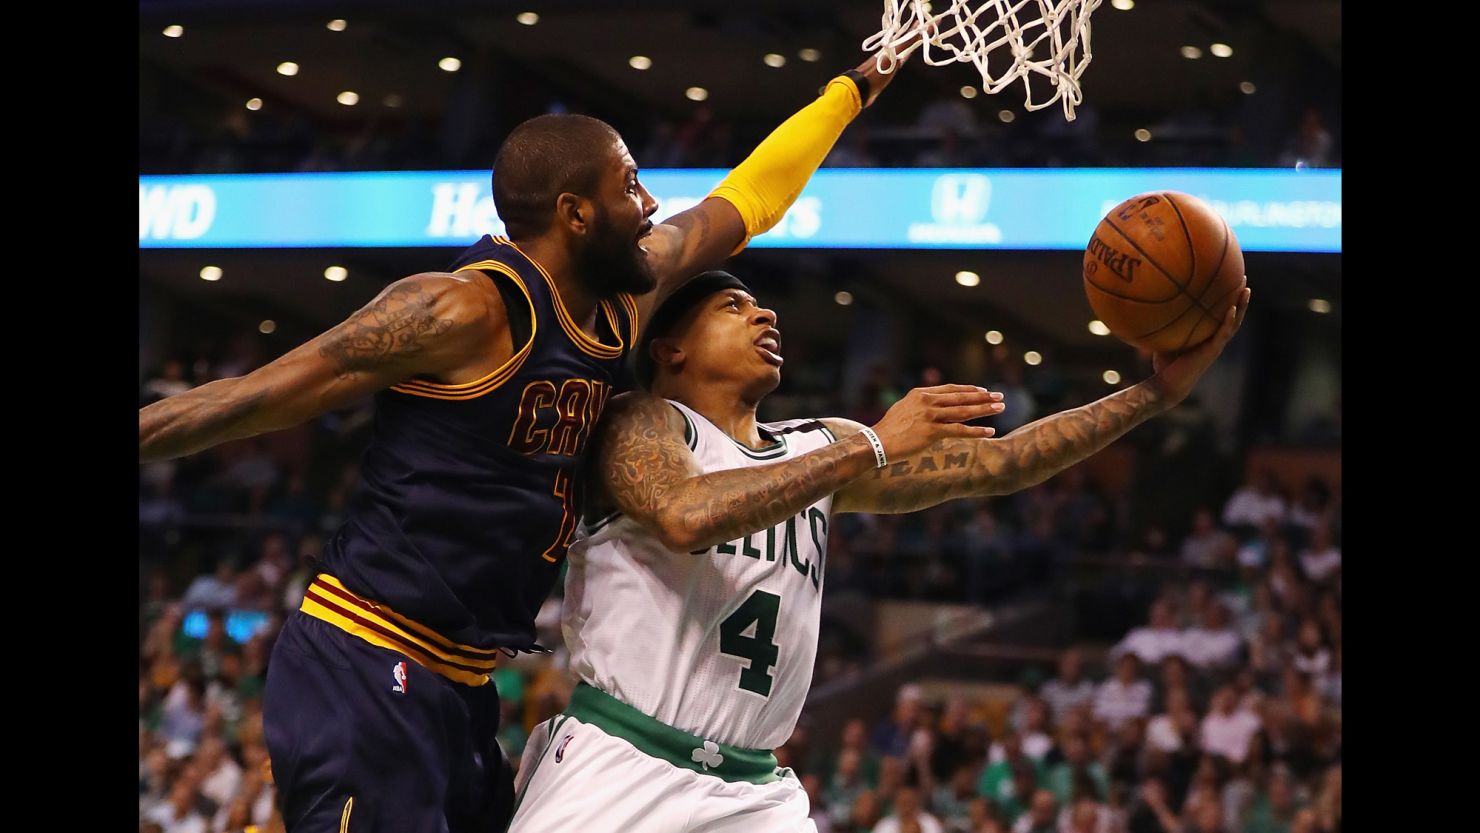 The Boston Celtics traded Isaiah Thomas, right, to the Cleveland Cavaliers for Kyrie Irving, left.